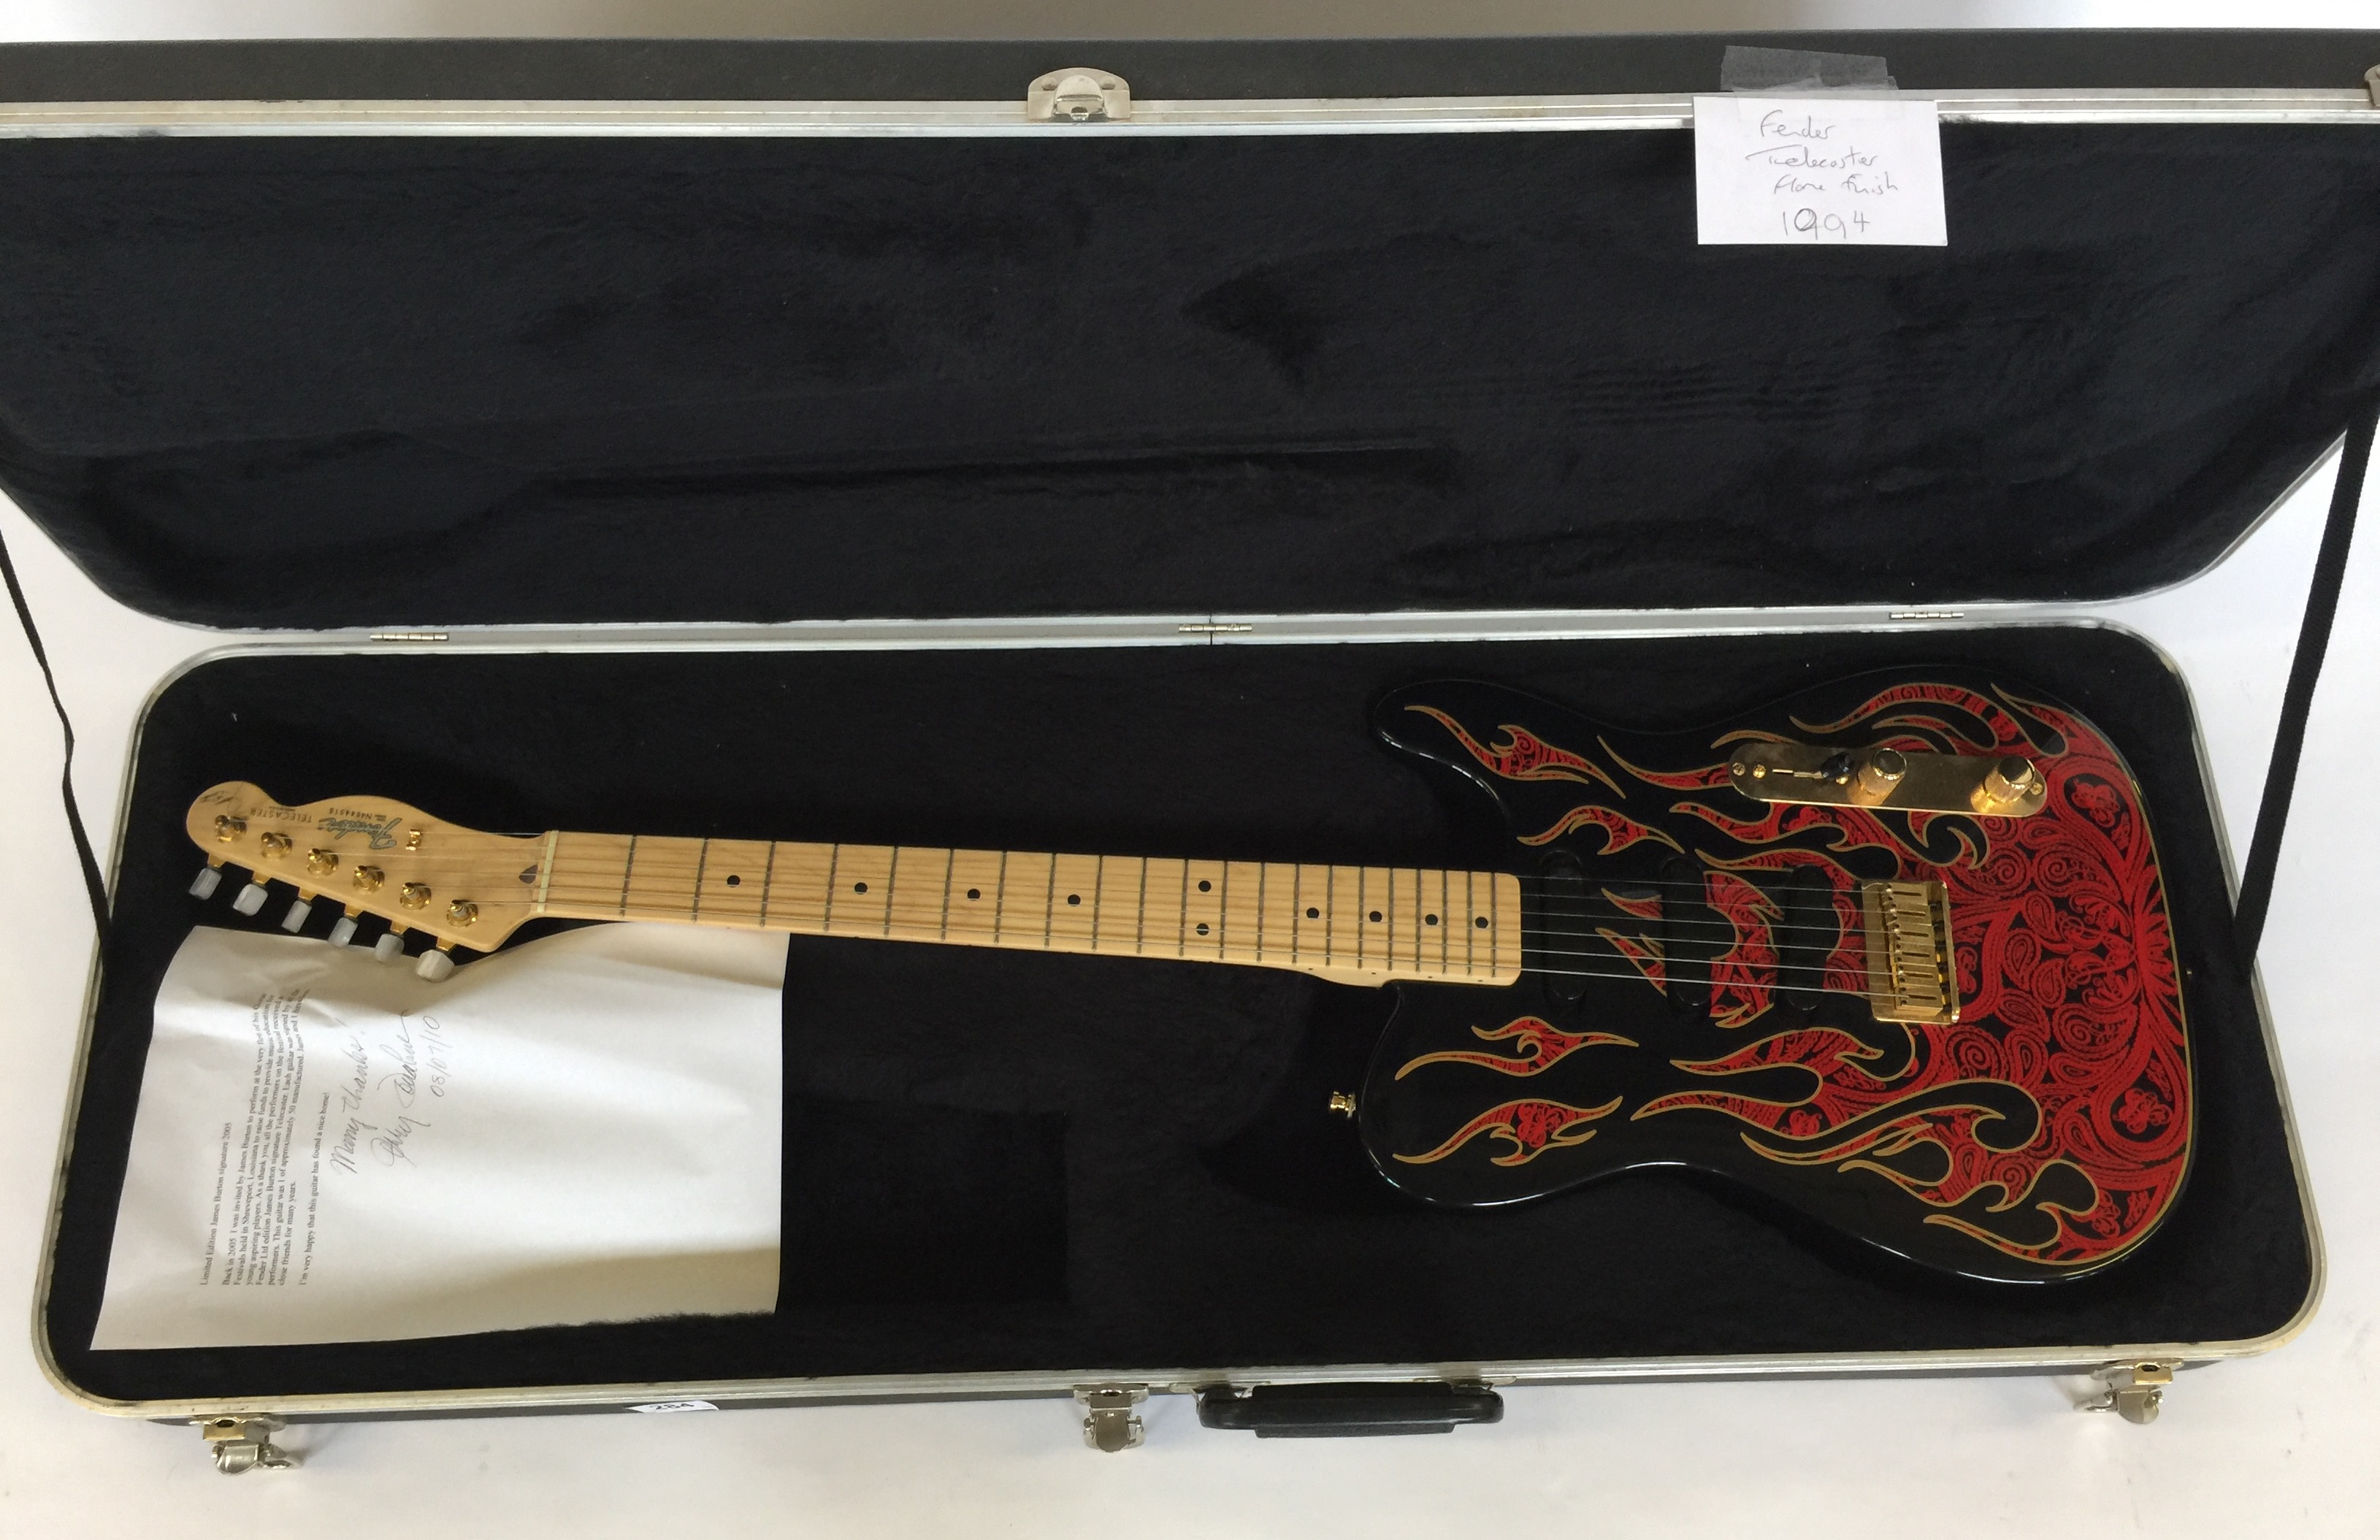 FENDER TELECASTER FLAME JAMES BURTON 1994 - limited artist edition that was gifted to Jerry Donahue - Image 6 of 7